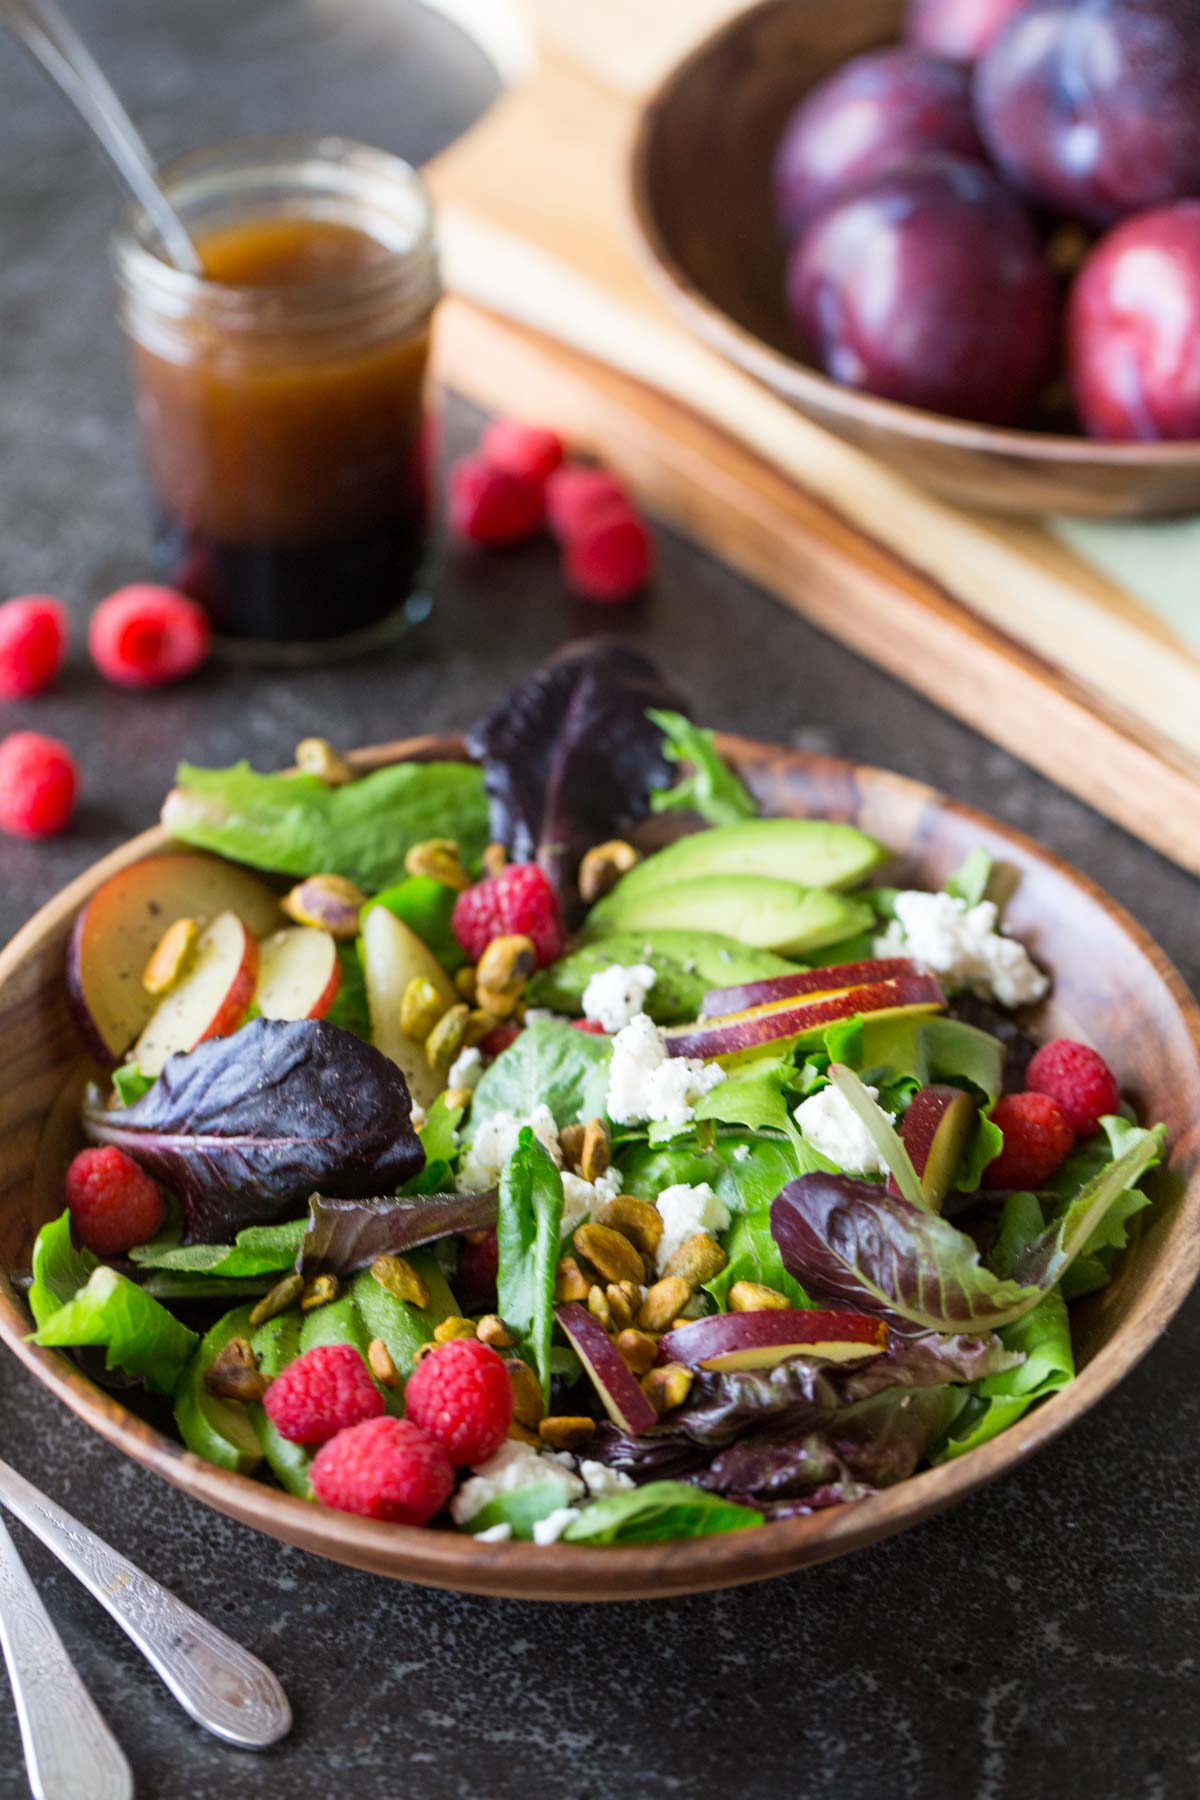 Summer Fruited Salad with Goat Cheese and Pistachios in a wood bowl, with a jar of homemade balsamic vinaigrette in the background along with a bowl of whole plums.  